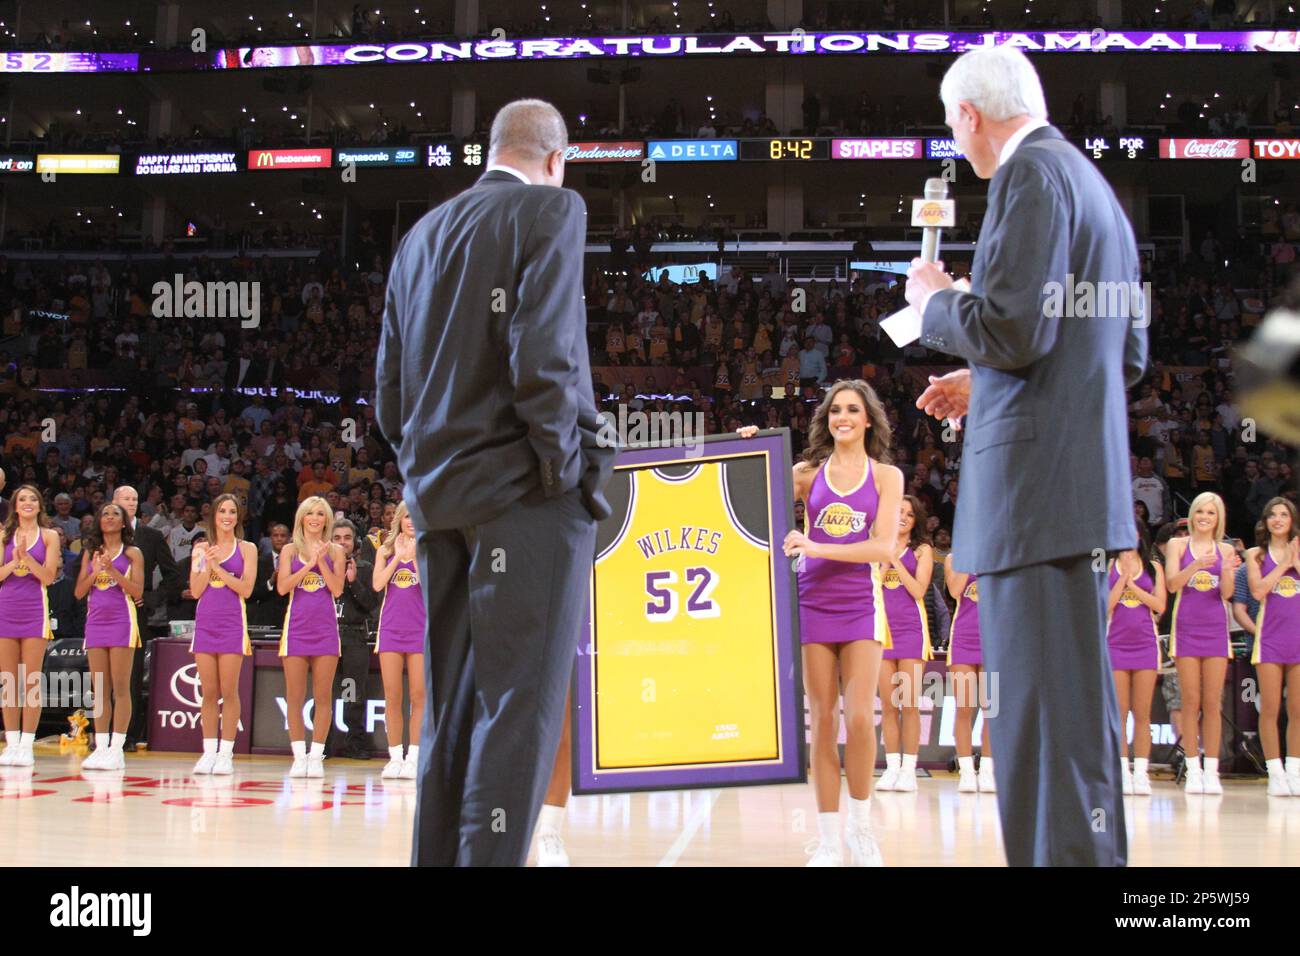 Lakers Retire Jamaal Wilkes No. 52 Jersey At STAPLES - CBS Los Angeles